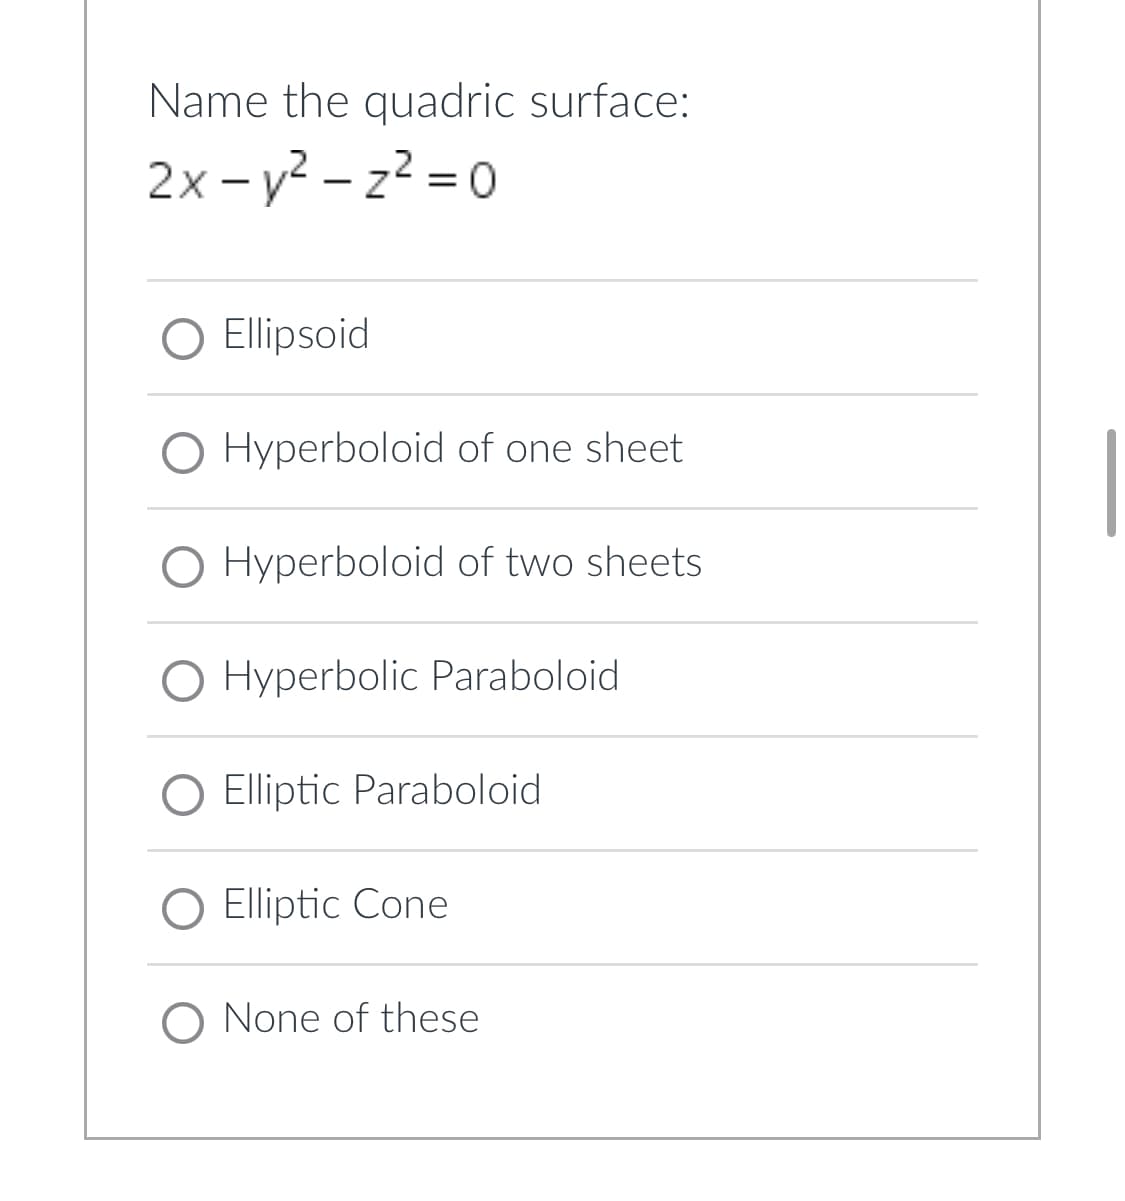 Name the quadric surface:
2x-y²-z²=0
O Ellipsoid
O Hyperboloid of one sheet
O Hyperboloid of two sheets
O Hyperbolic Paraboloid
Elliptic Paraboloid
O Elliptic Cone
O None of these.